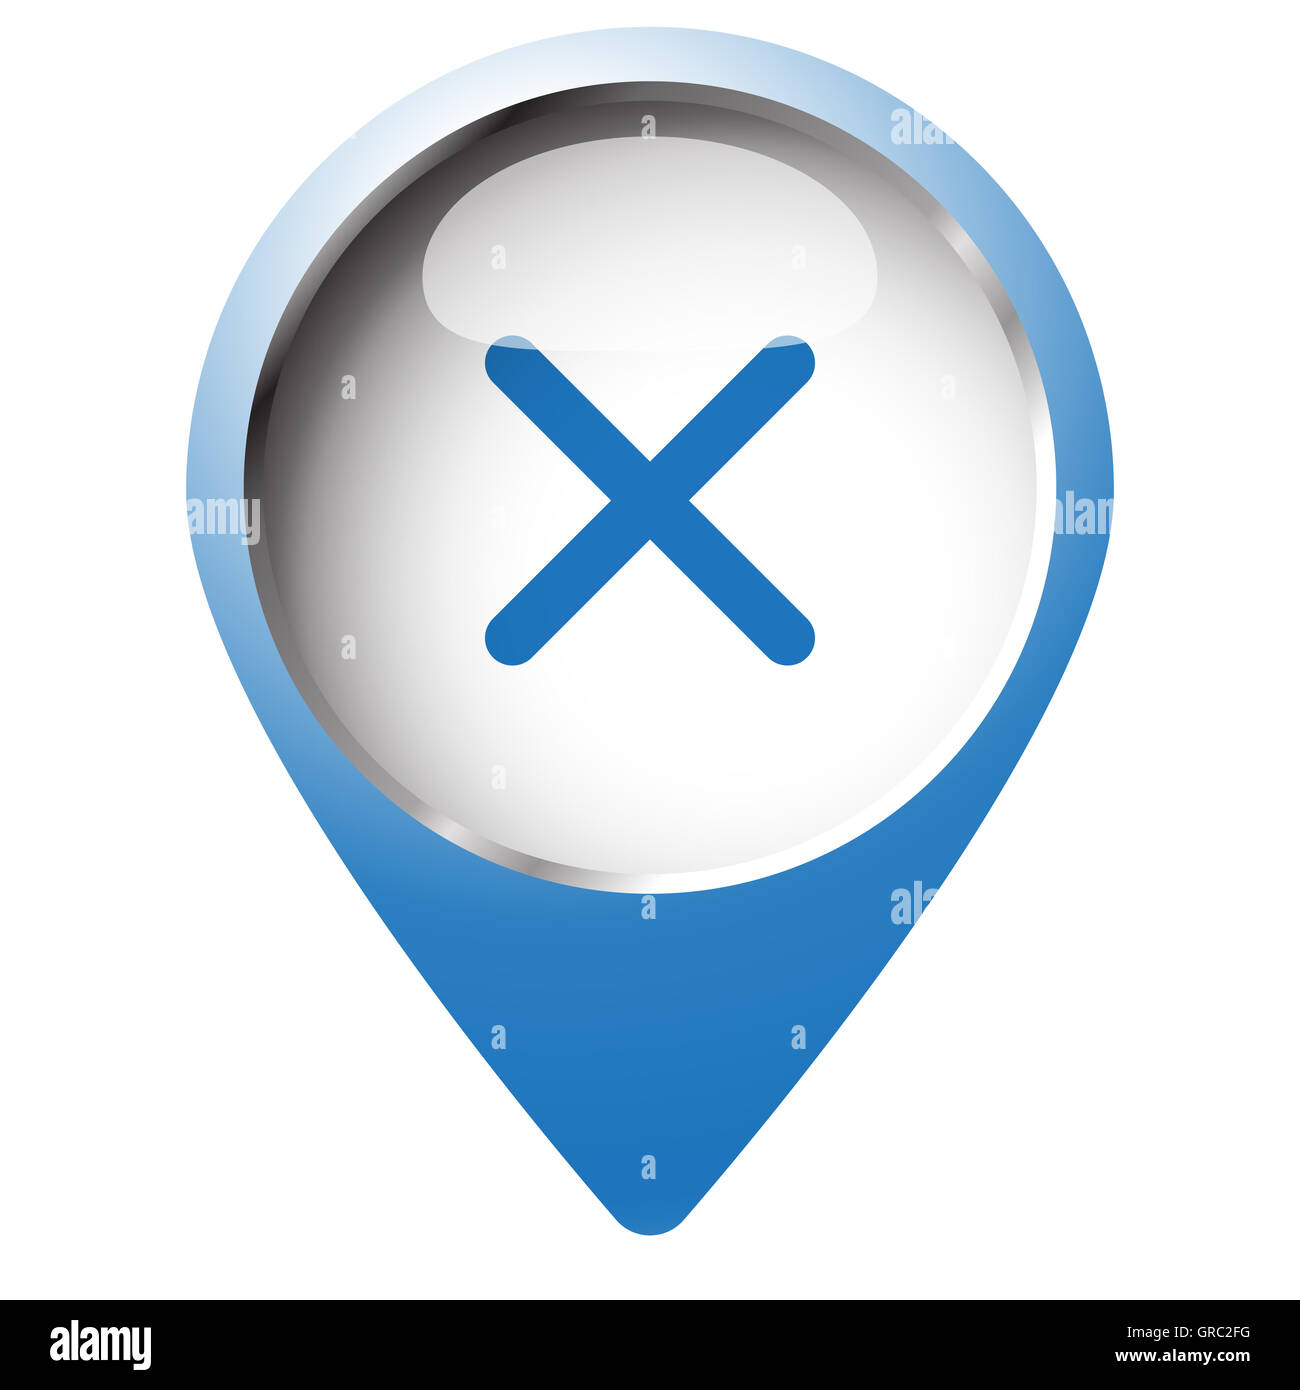 Map pin symbol with Cancel icon. Blue symbol on white background. Stock Photo